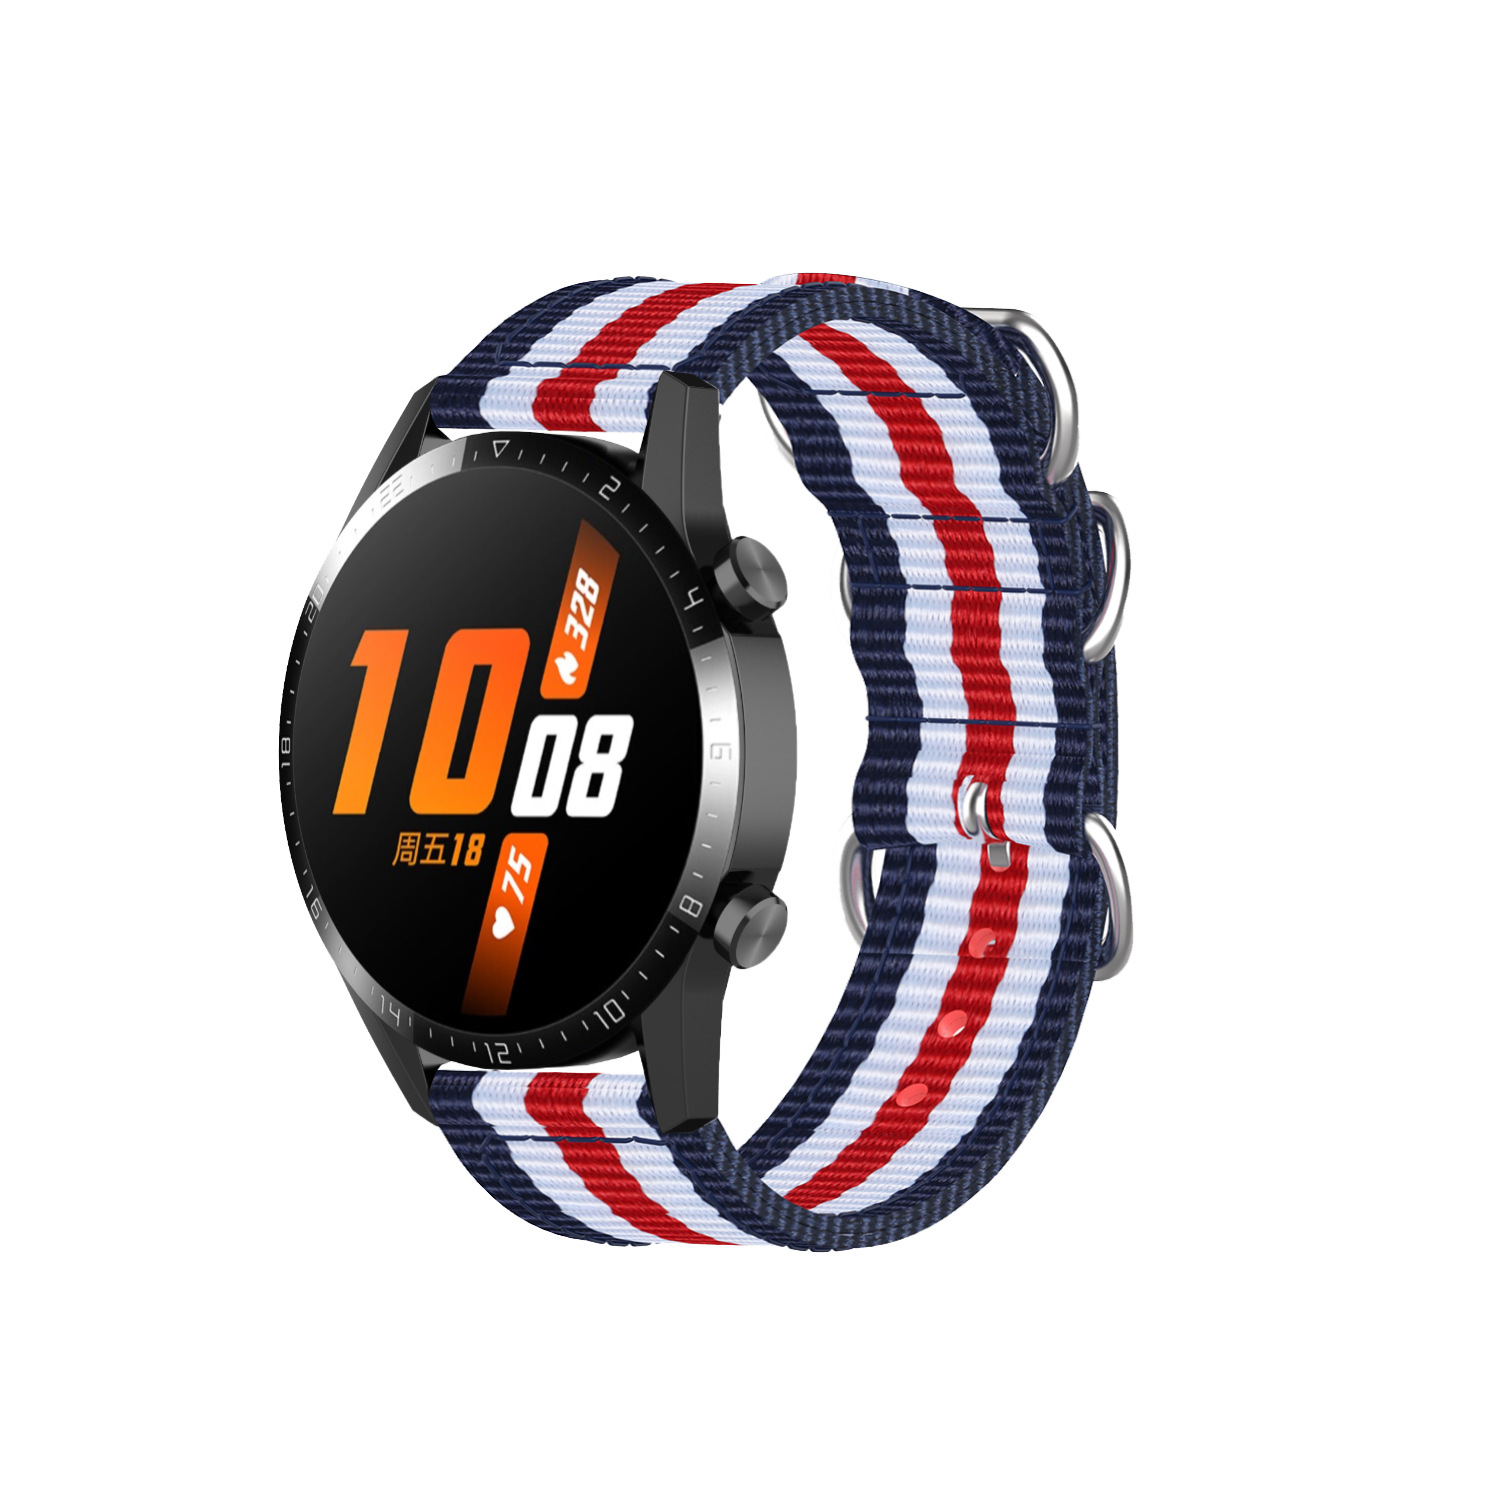 Bakeey-2022mm-Width-Breathable-Sweatproof-Nylon-Canvas-Watch-Band-Strap-Replacement-for-Huawei-Watch-1926643-18